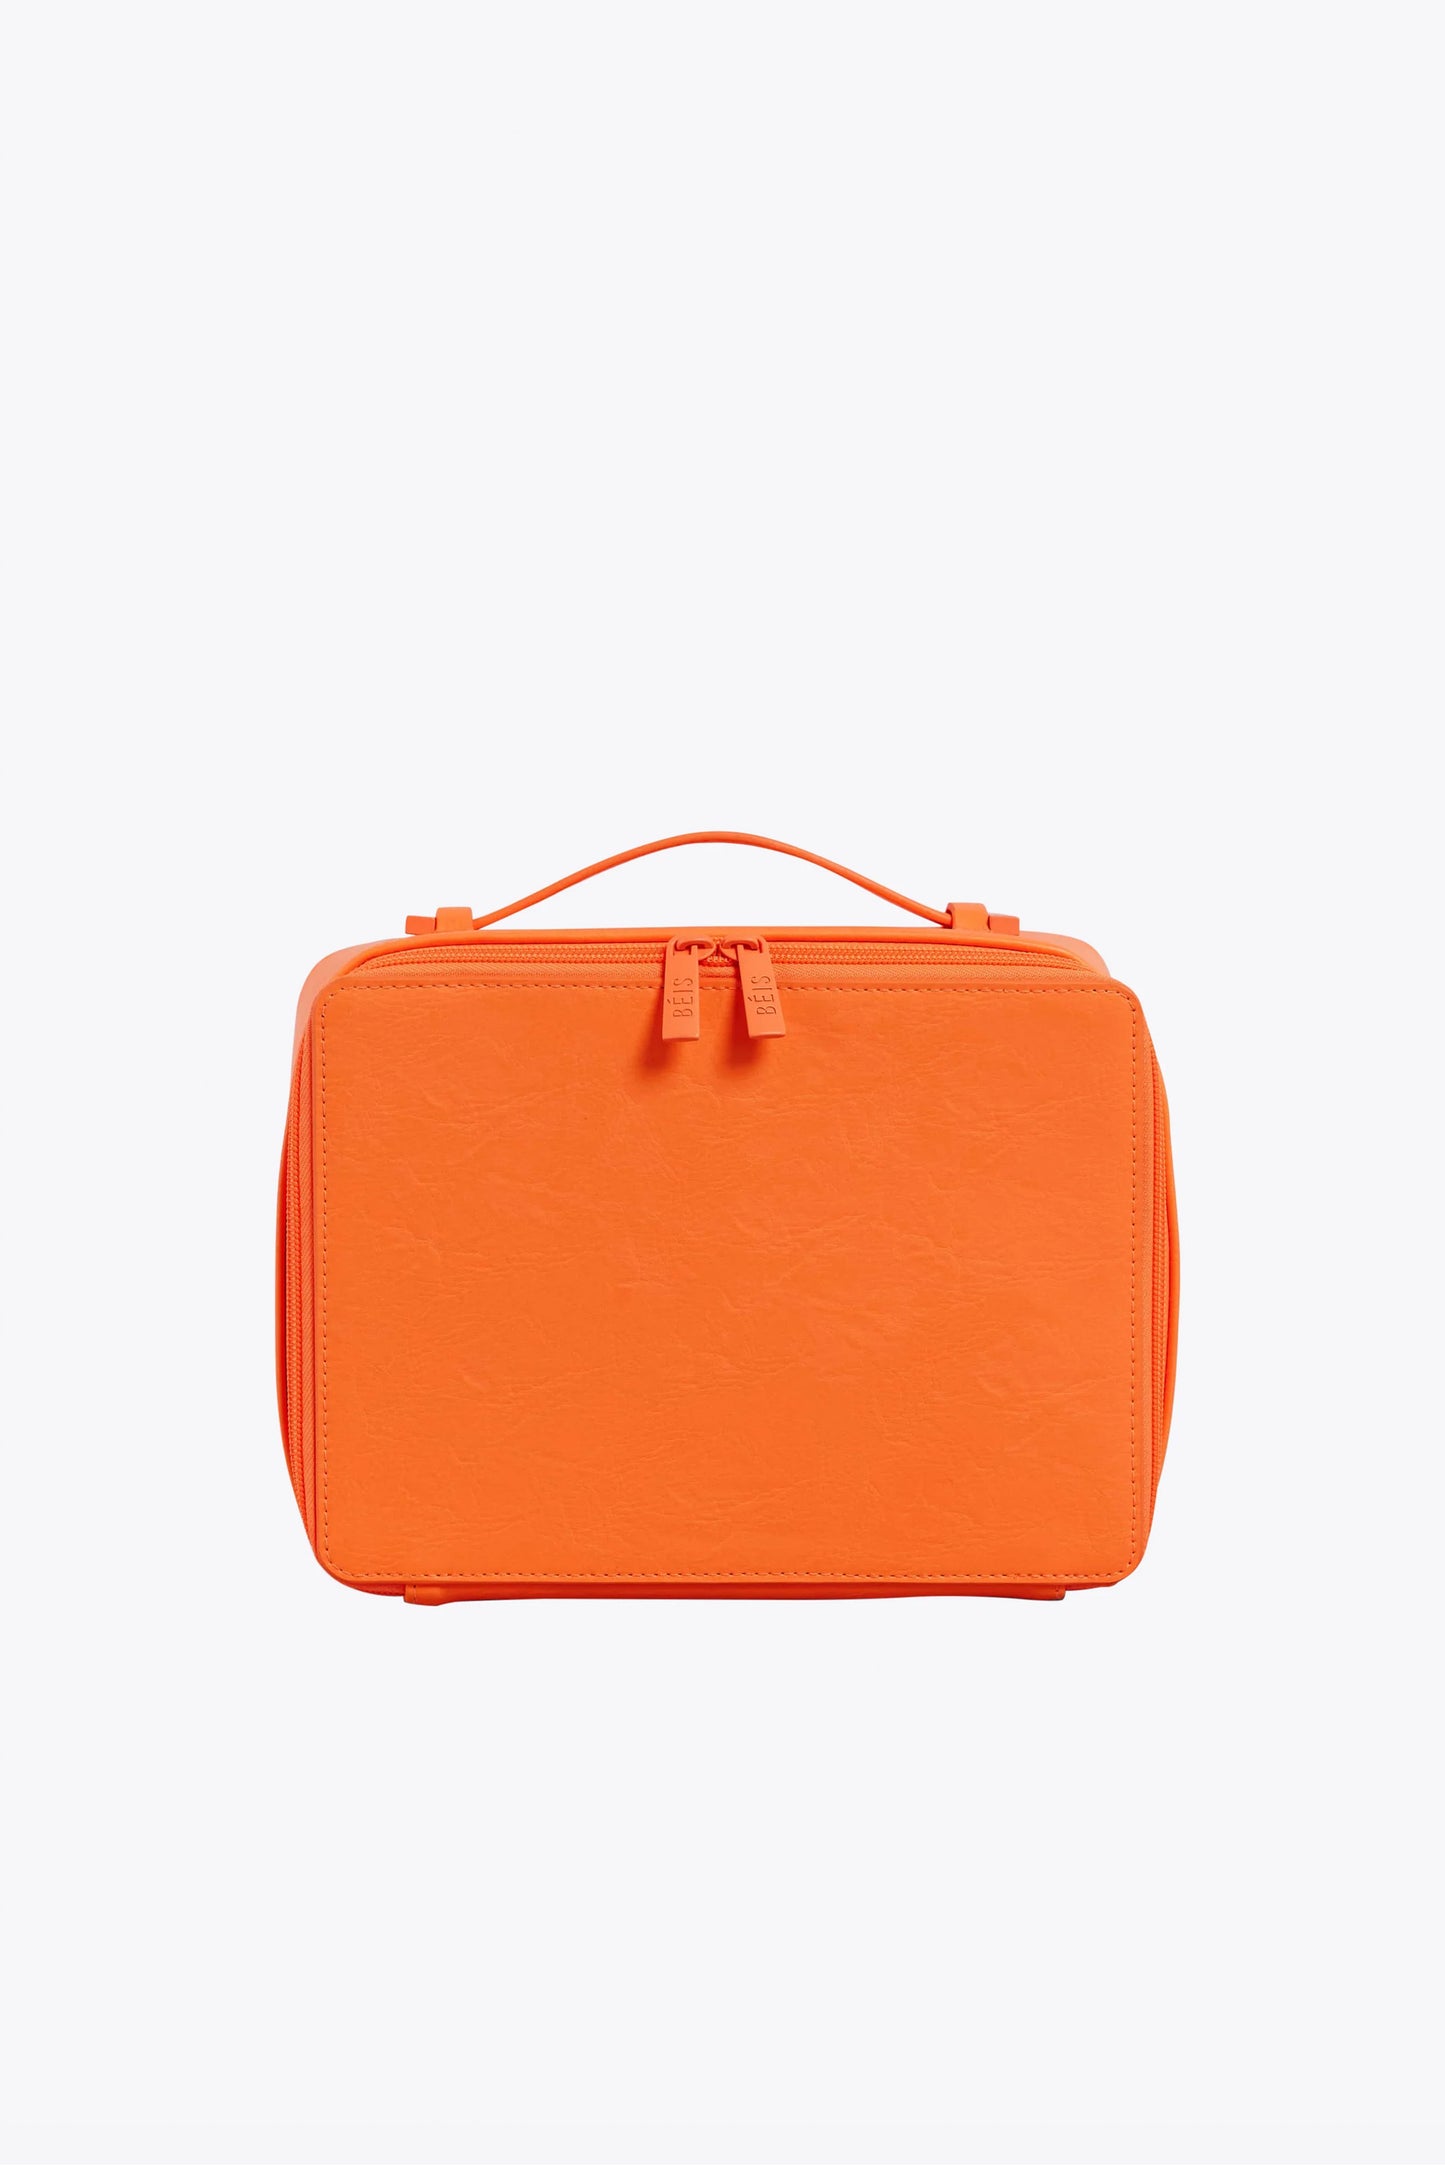 The Cosmetic Case in Creamsicle